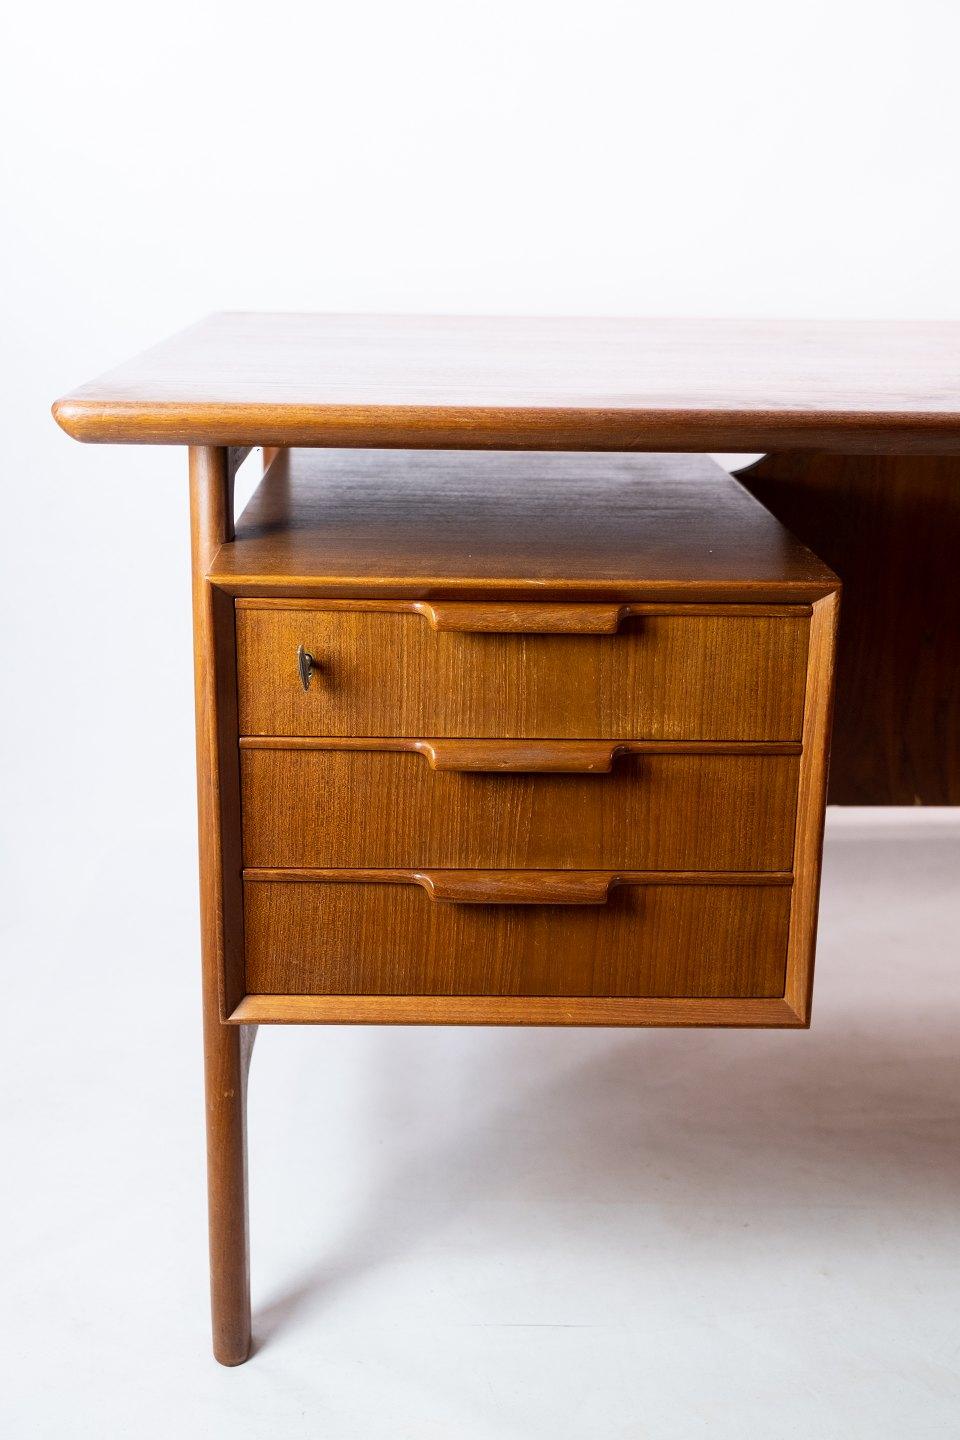 Desk in teak designed by Omann Junior from the 1960s. The table is in great vintage condition.